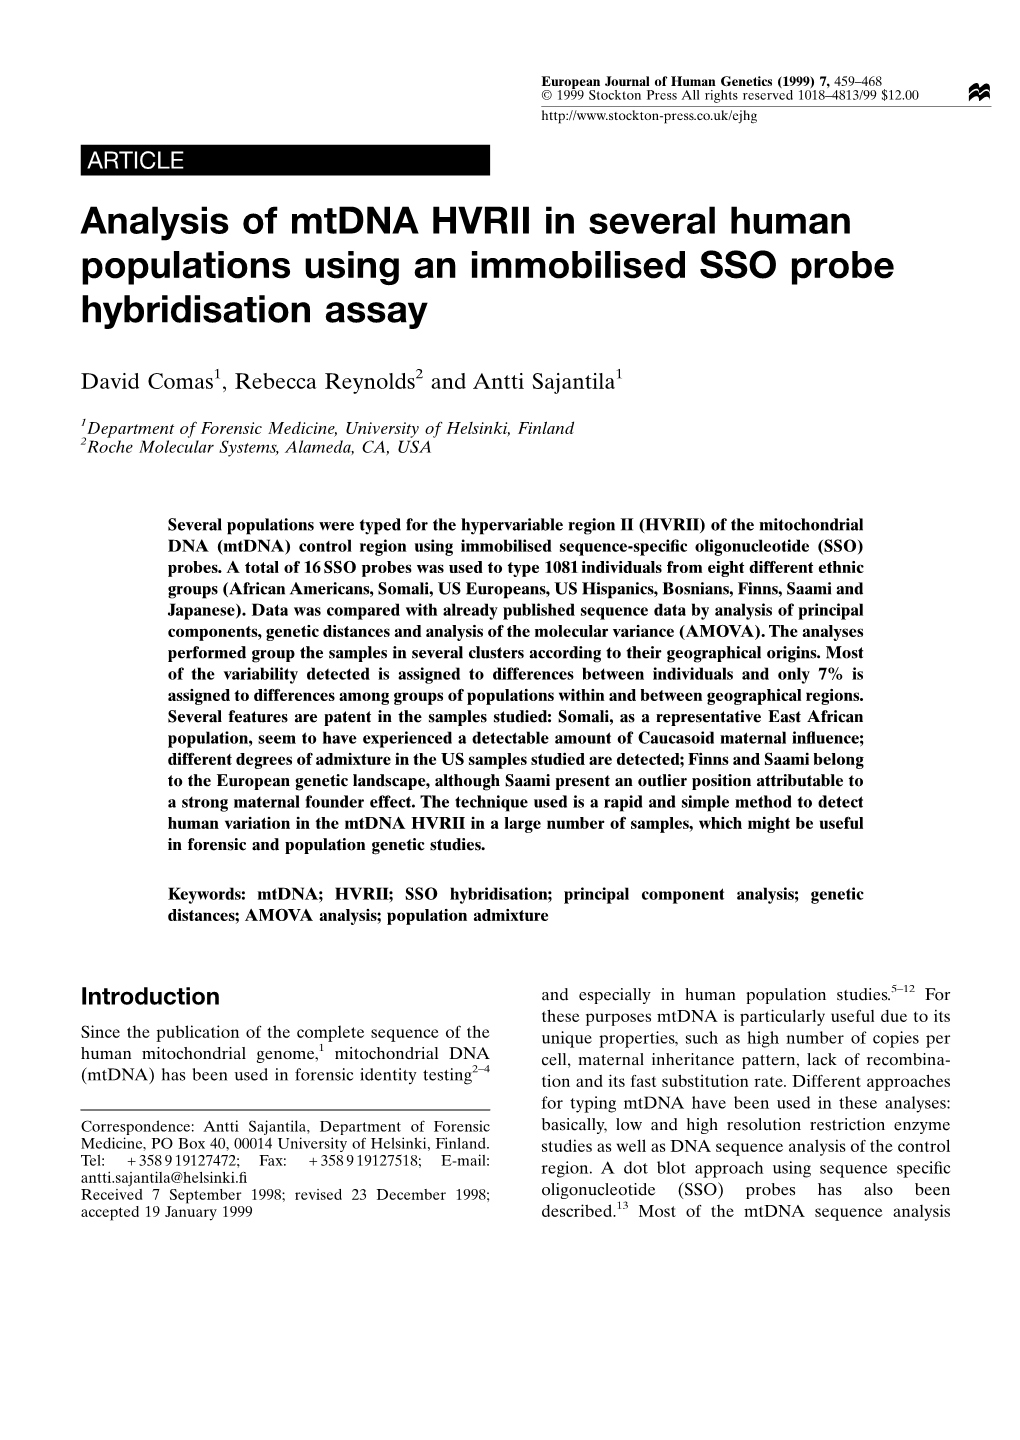 Analysis of Mtdna HVRII in Several Human Populations Using an Immobilised SSO Probe Hybridisation Assay